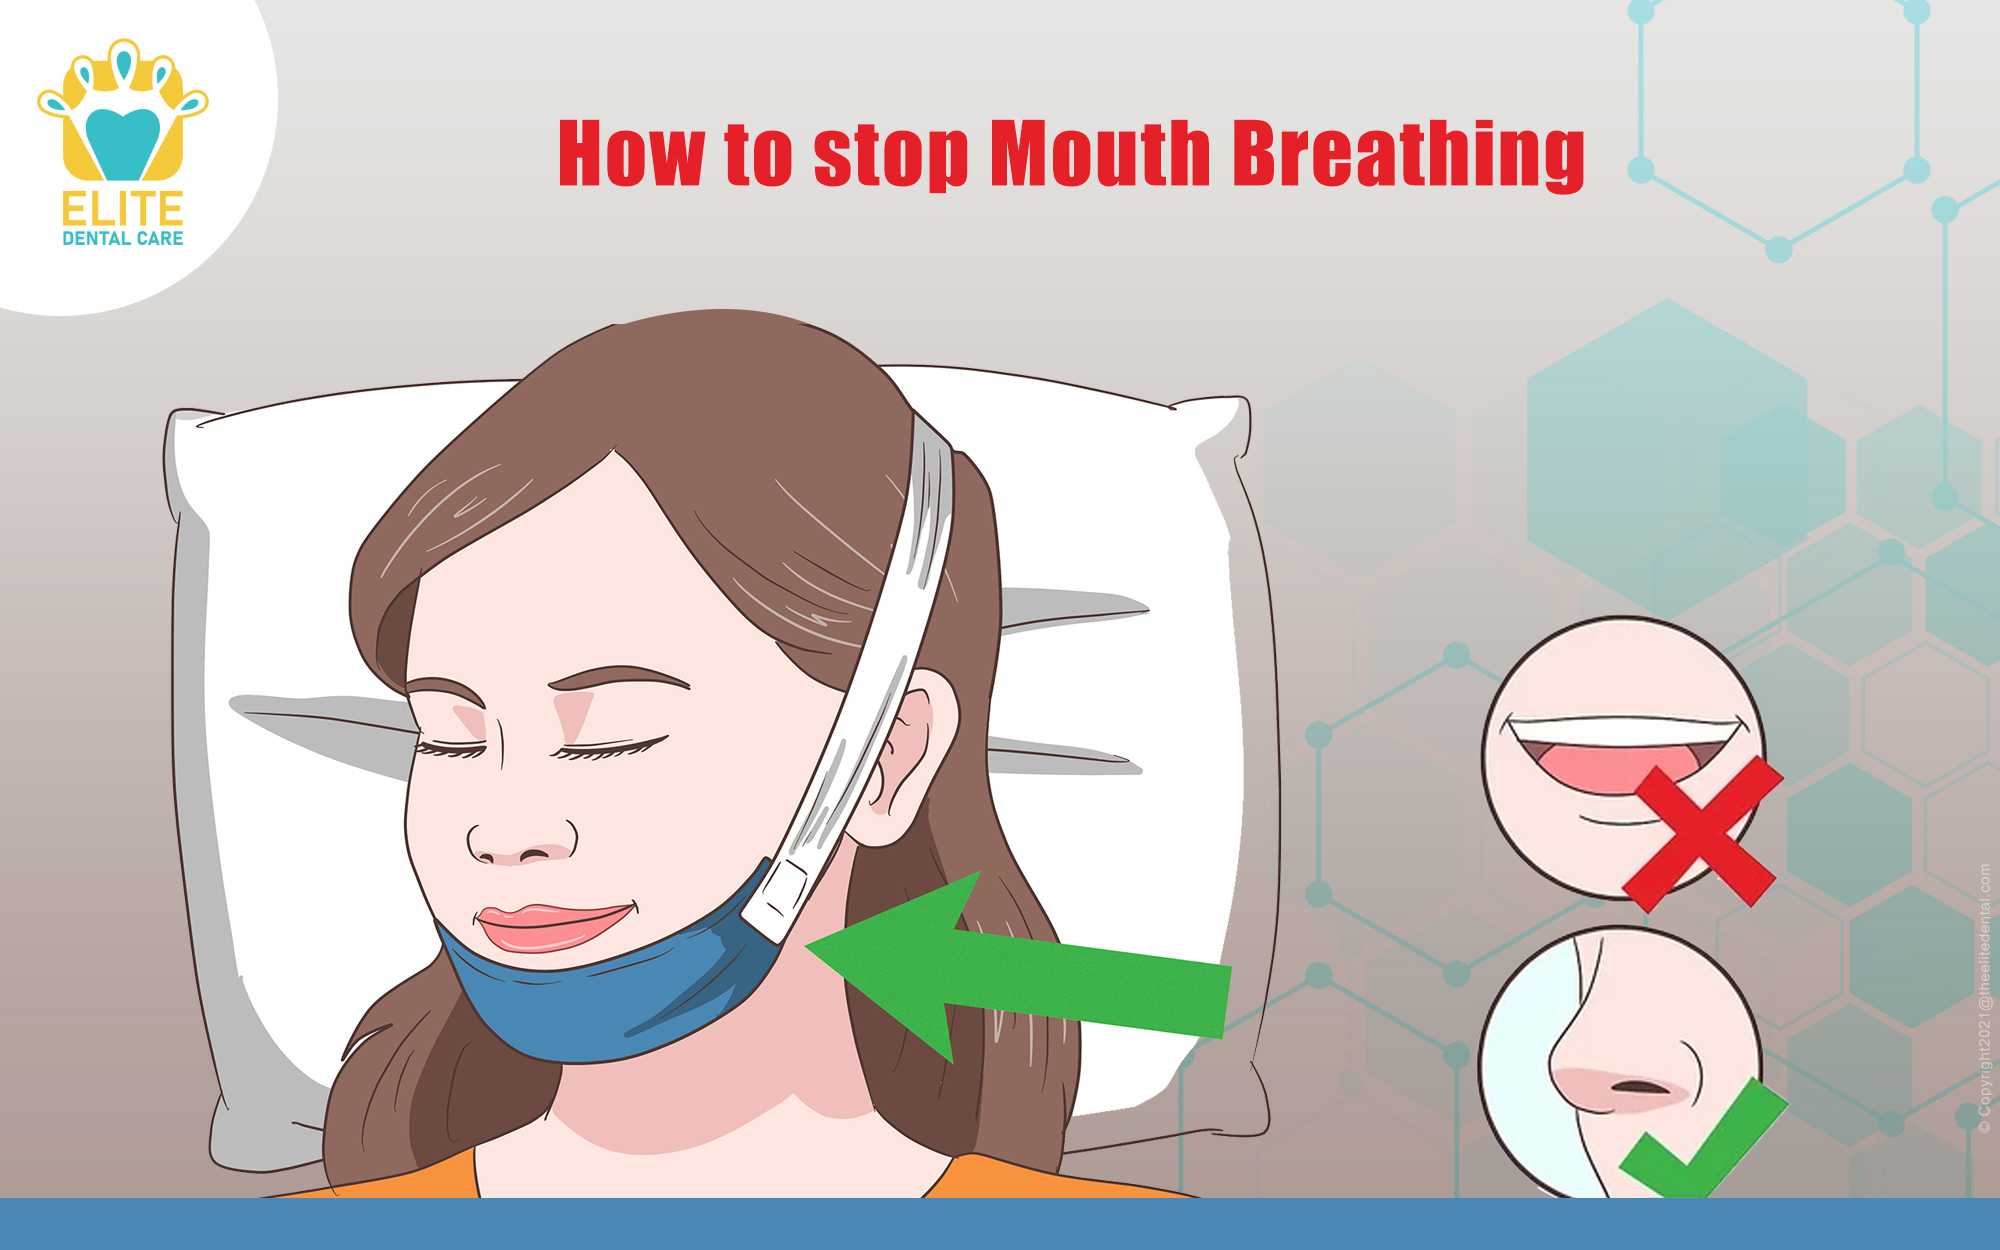 Breathing problems? Try closing your mouth breathing only through nose